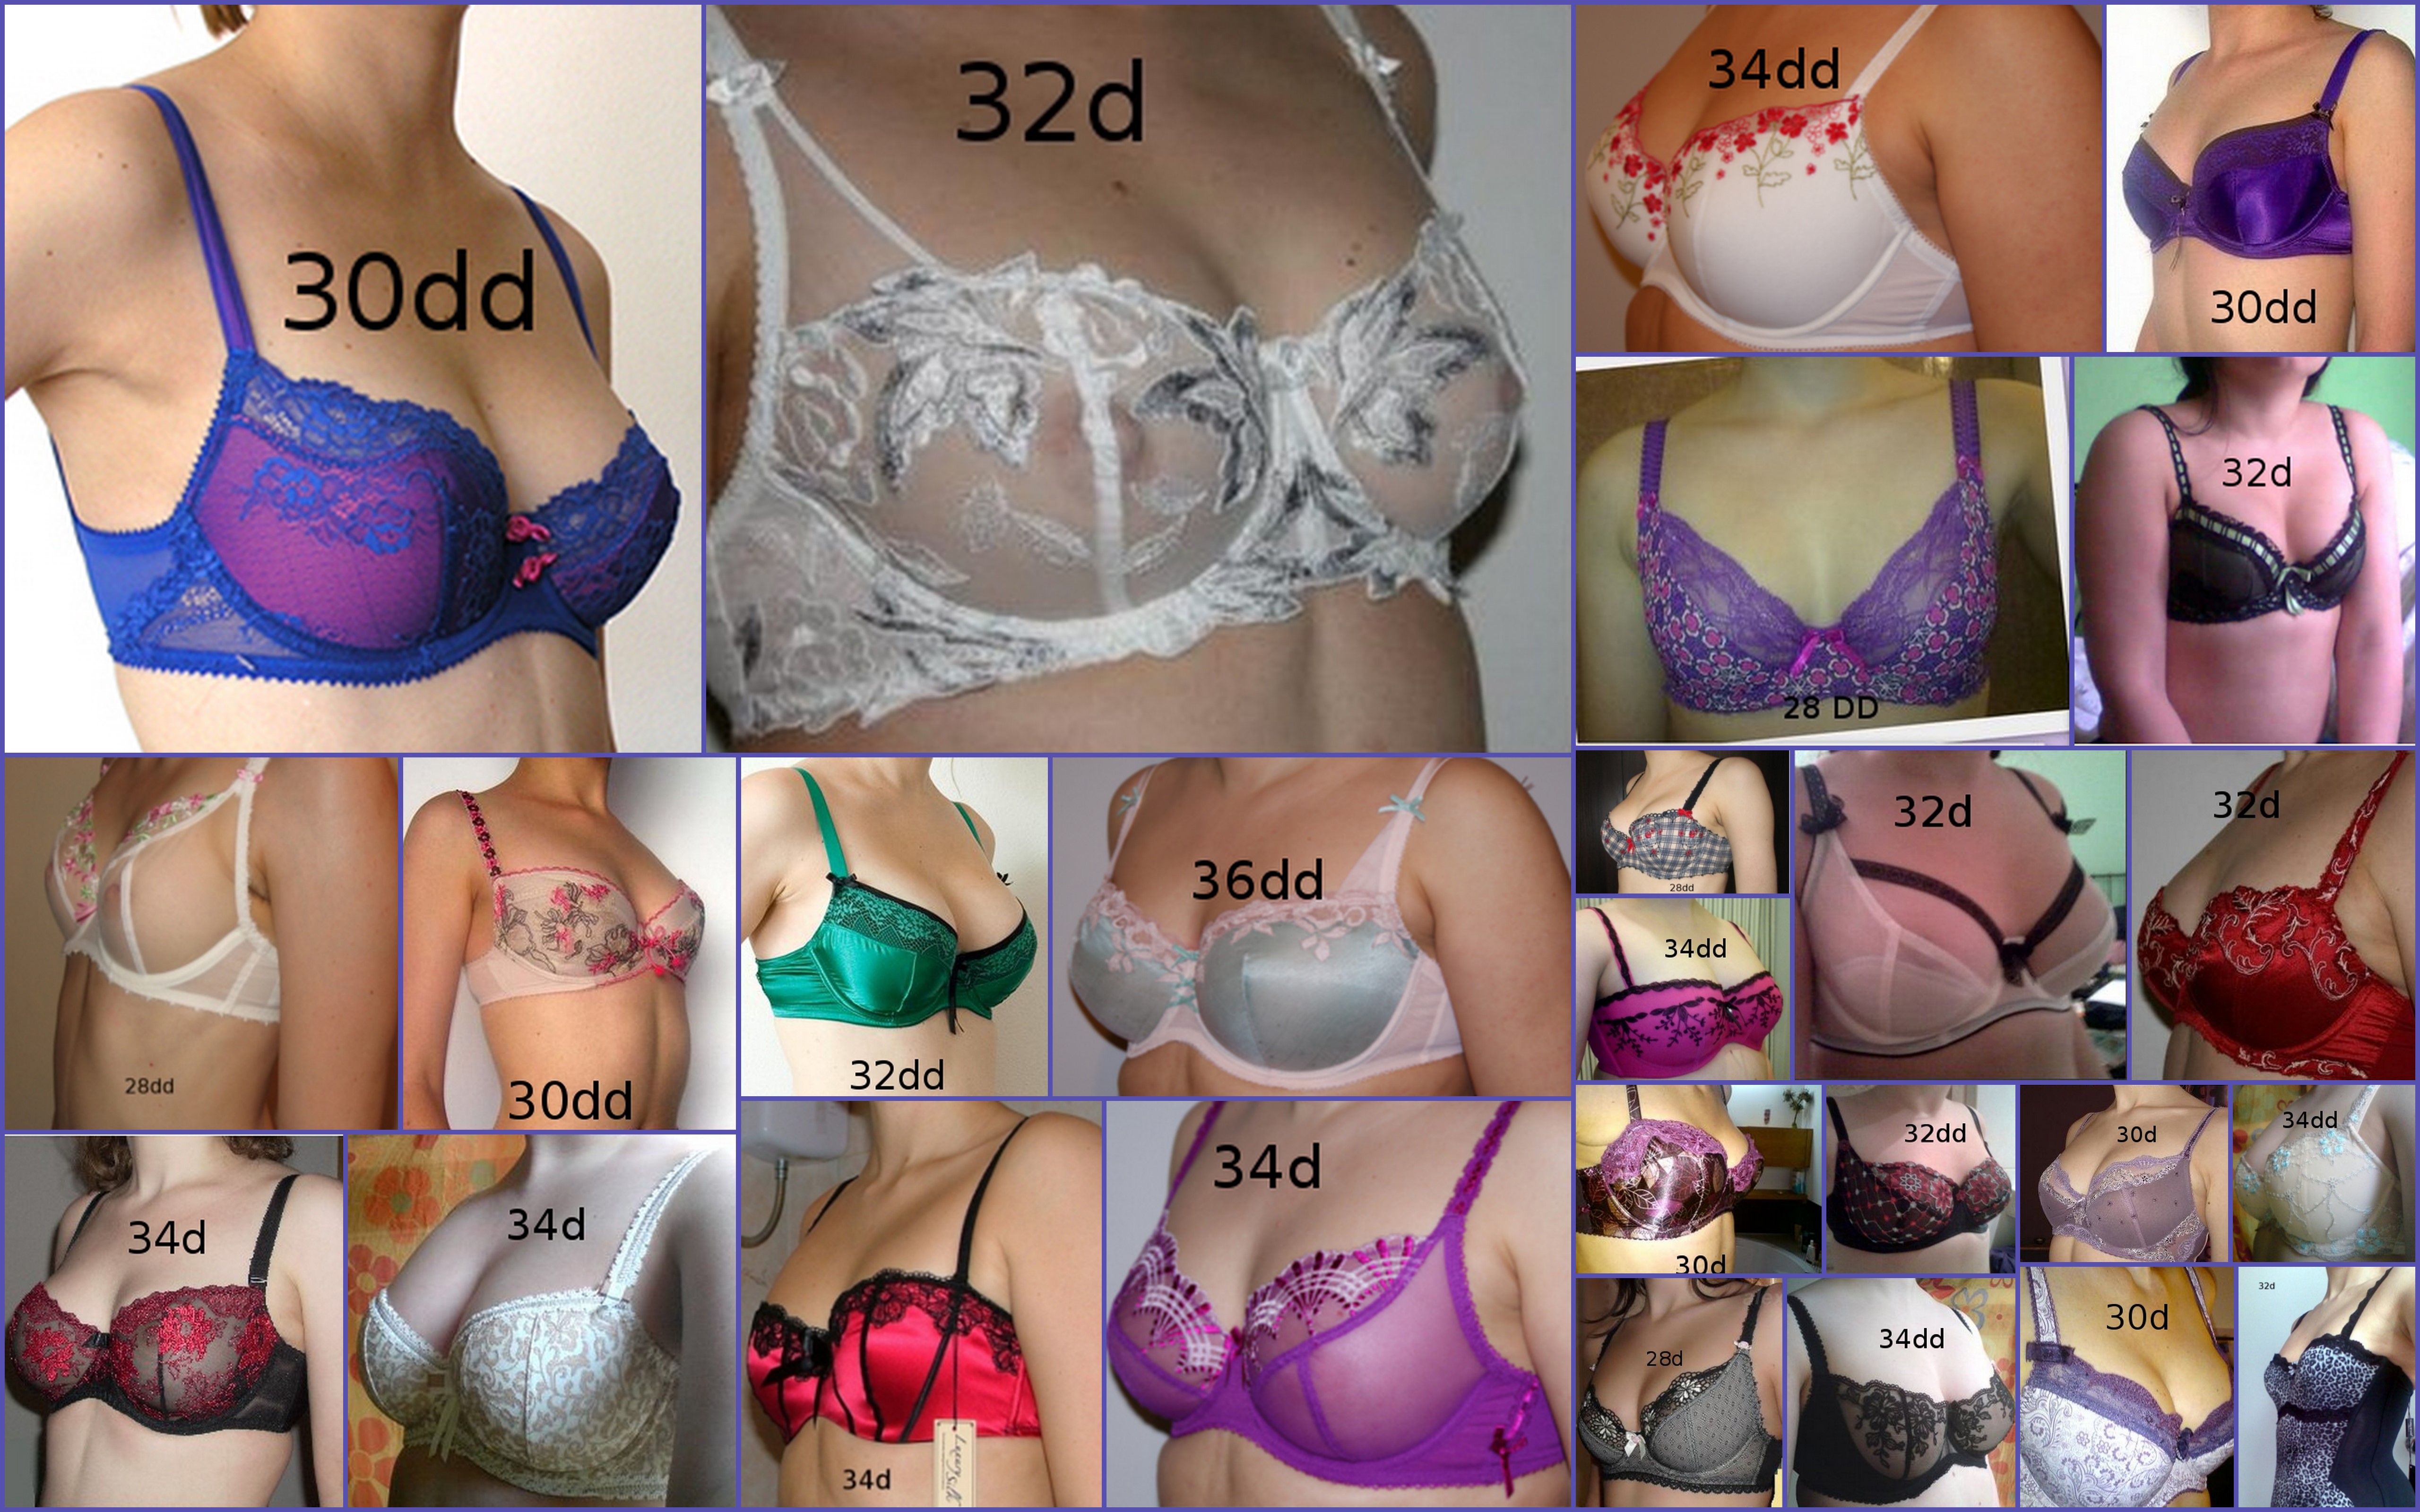 Today I had a very petite friend tell me she was a 34D. Is she wearing the  wrong size or do I simply not know how bras work? : r/AskWomen